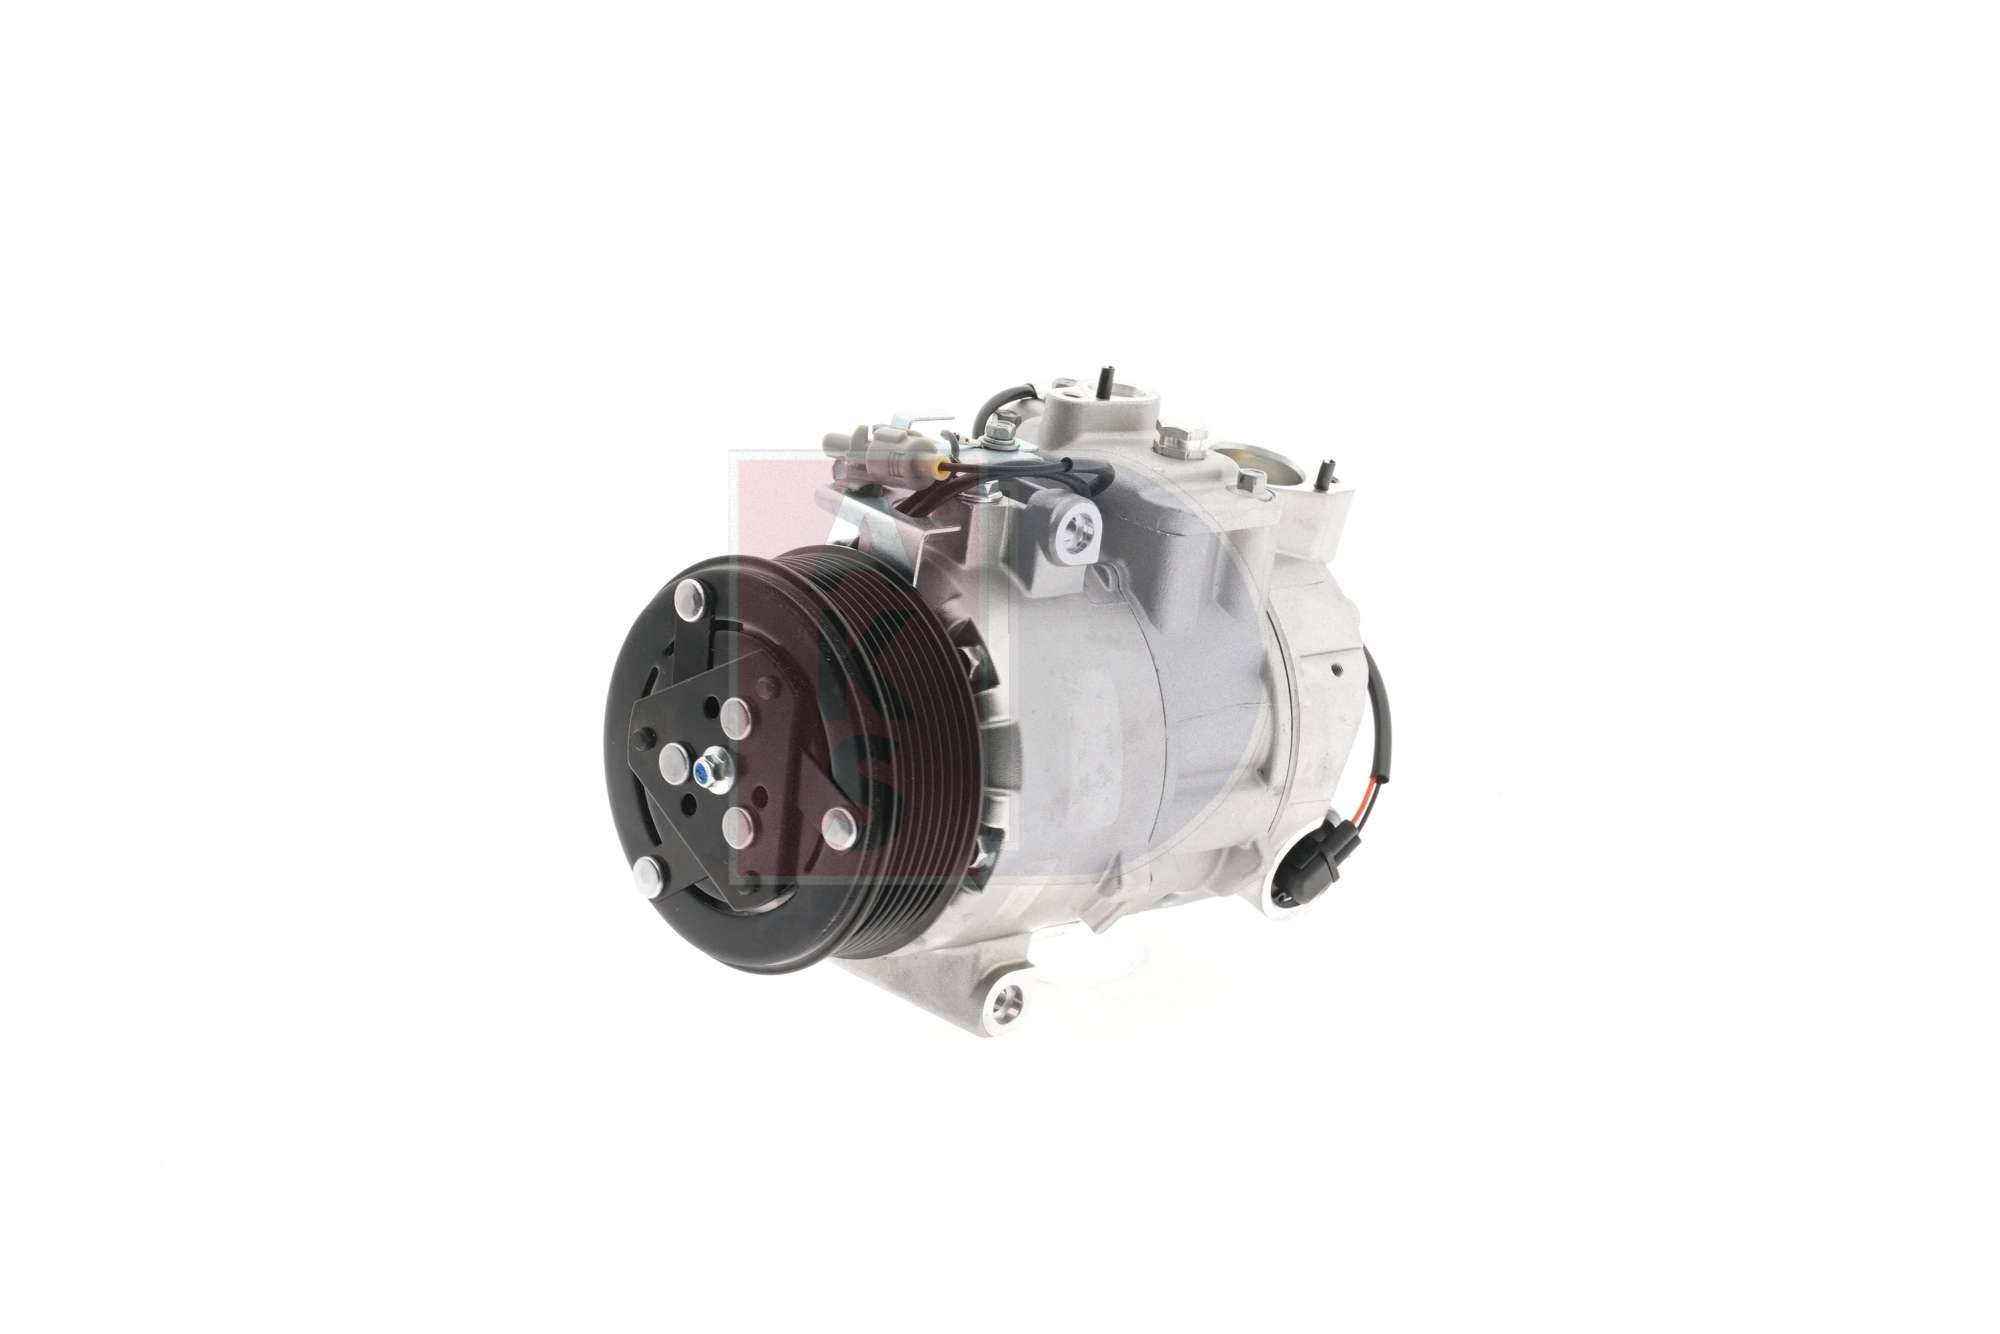 Air conditioning compressor 852546N from AKS DASIS